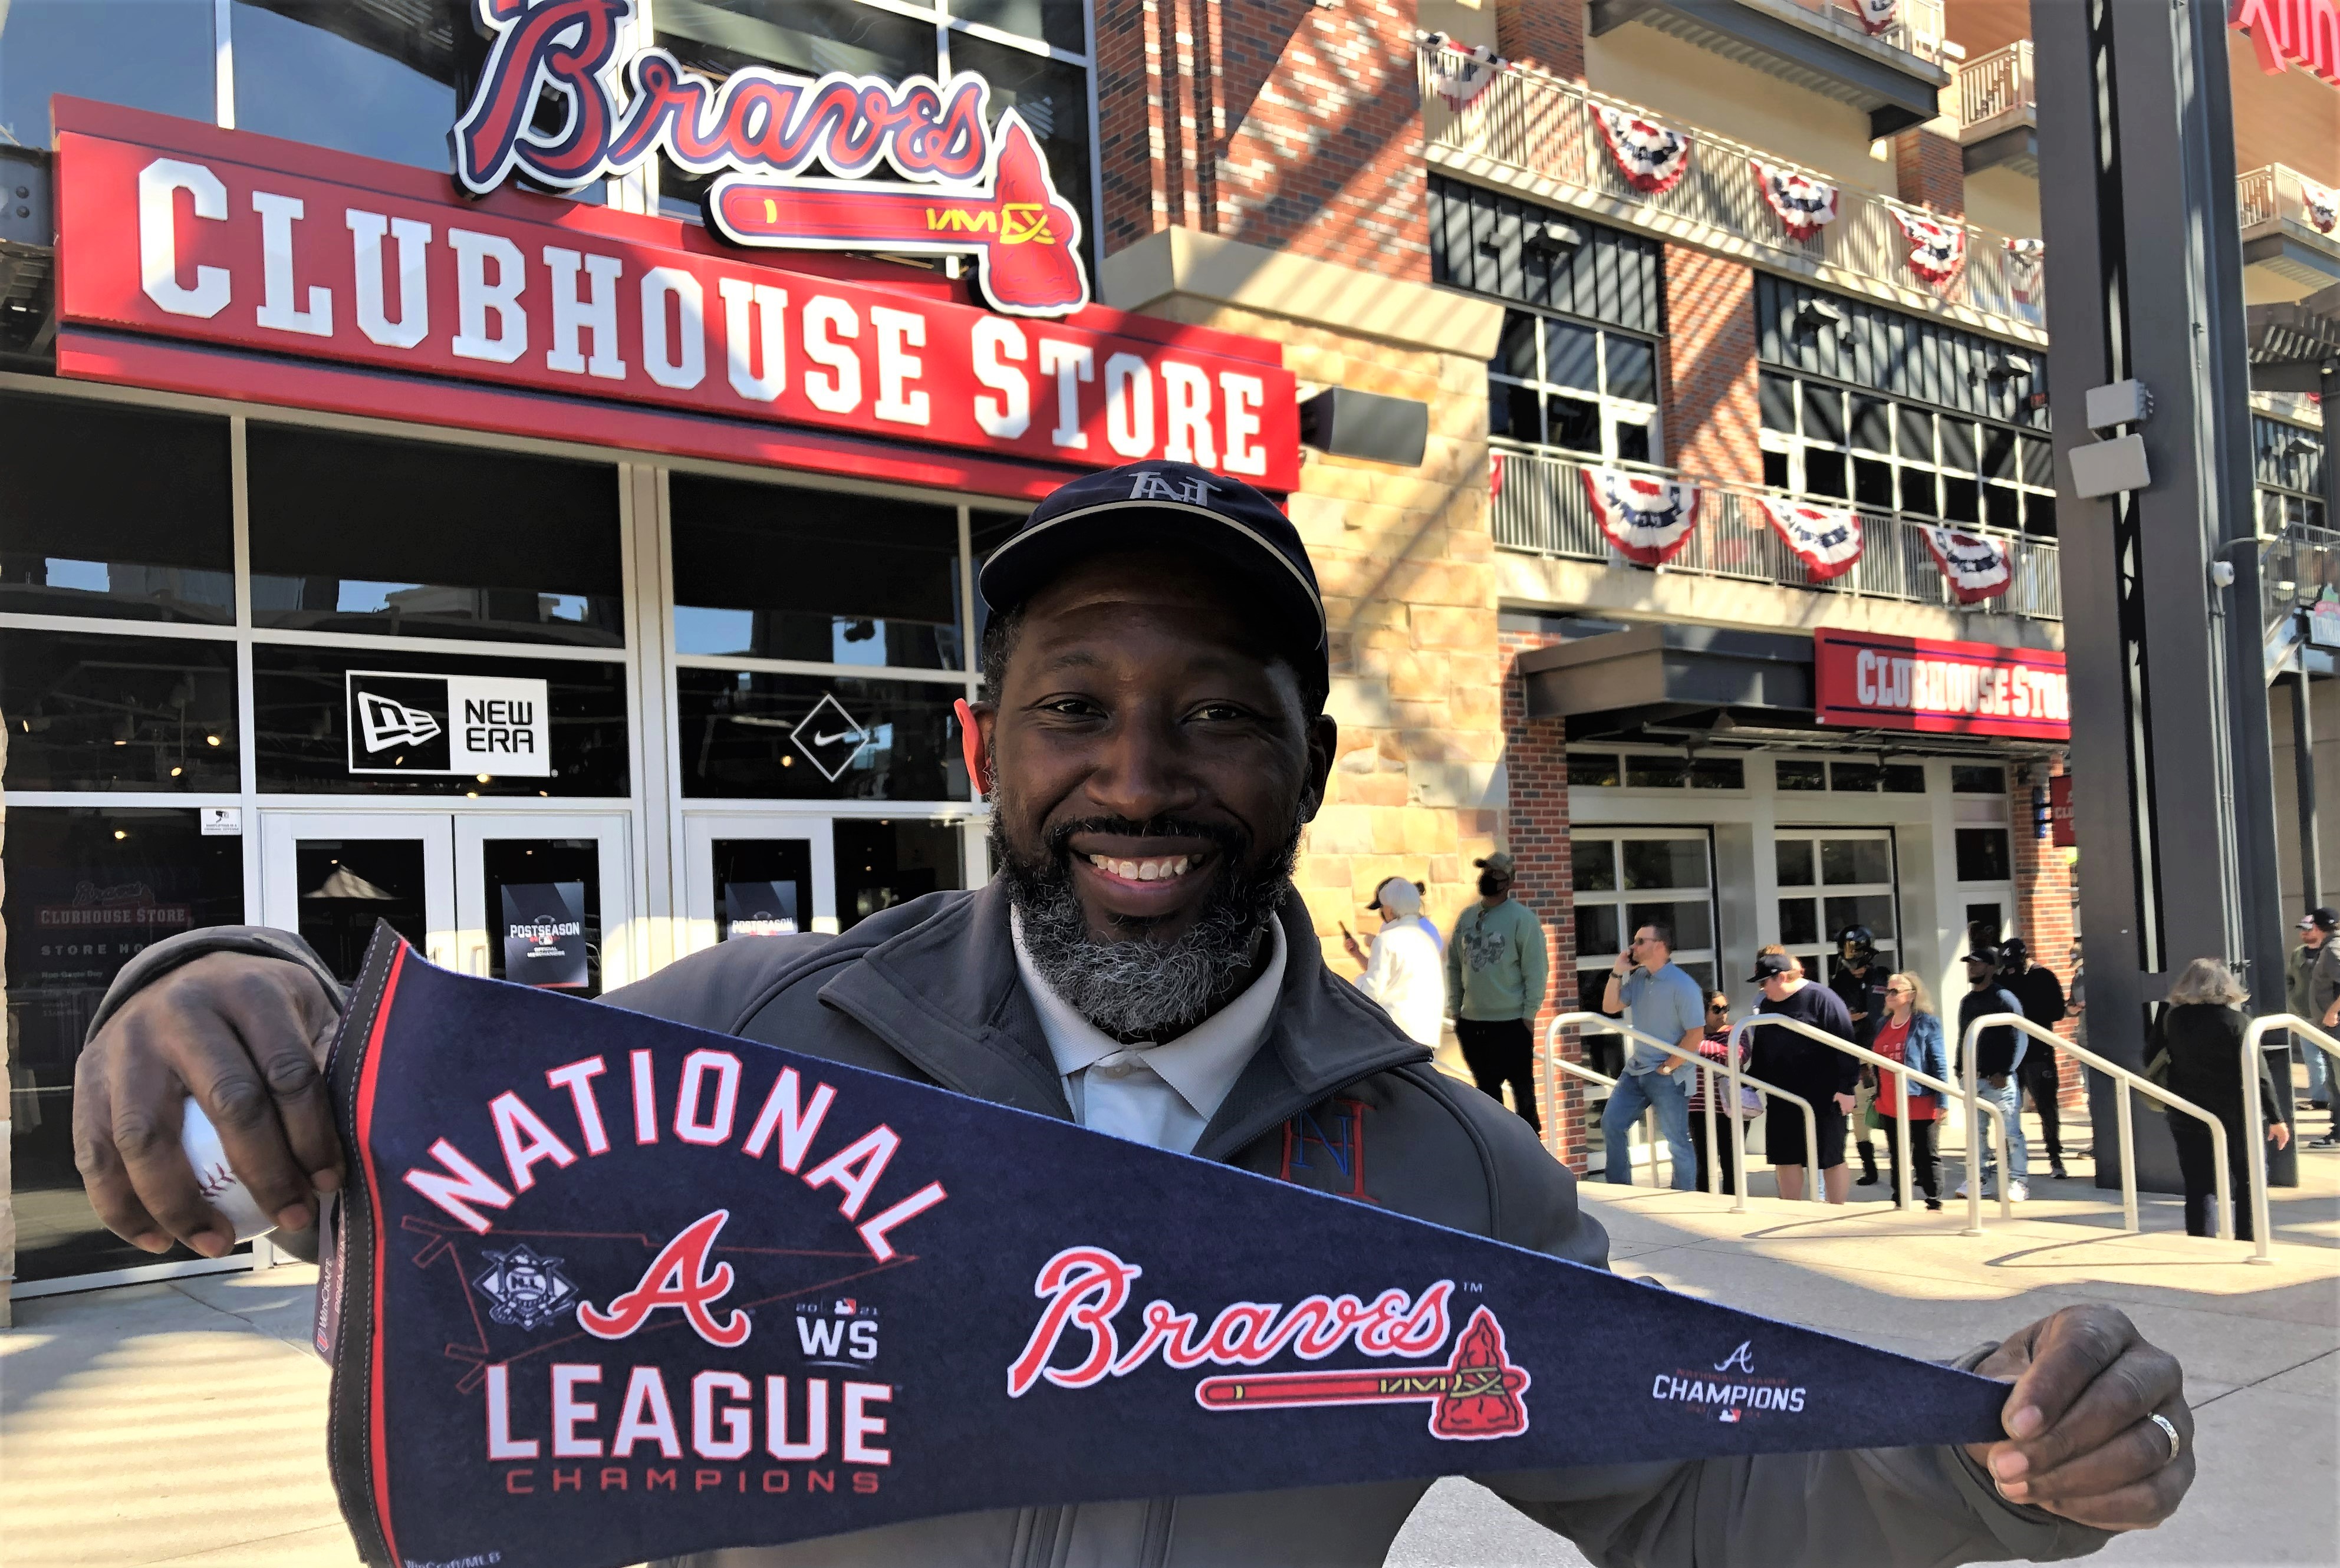 Threads by Braves Clubhouse Store (@bravesthreads) • Instagram photos and  videos